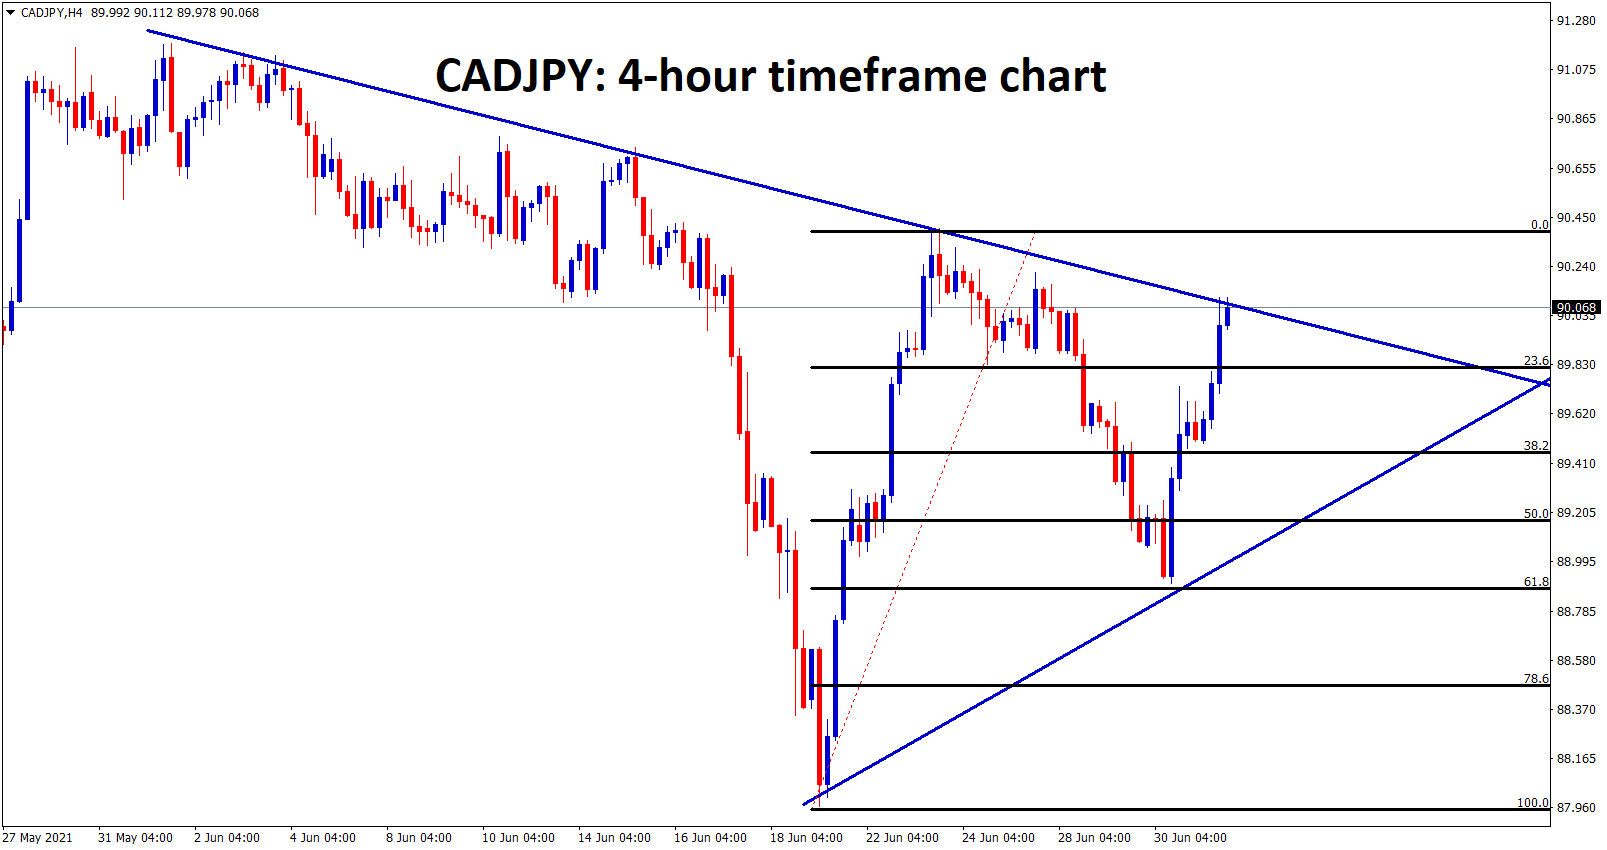 CADJPY bounces back to lower high after 61.8 retracement